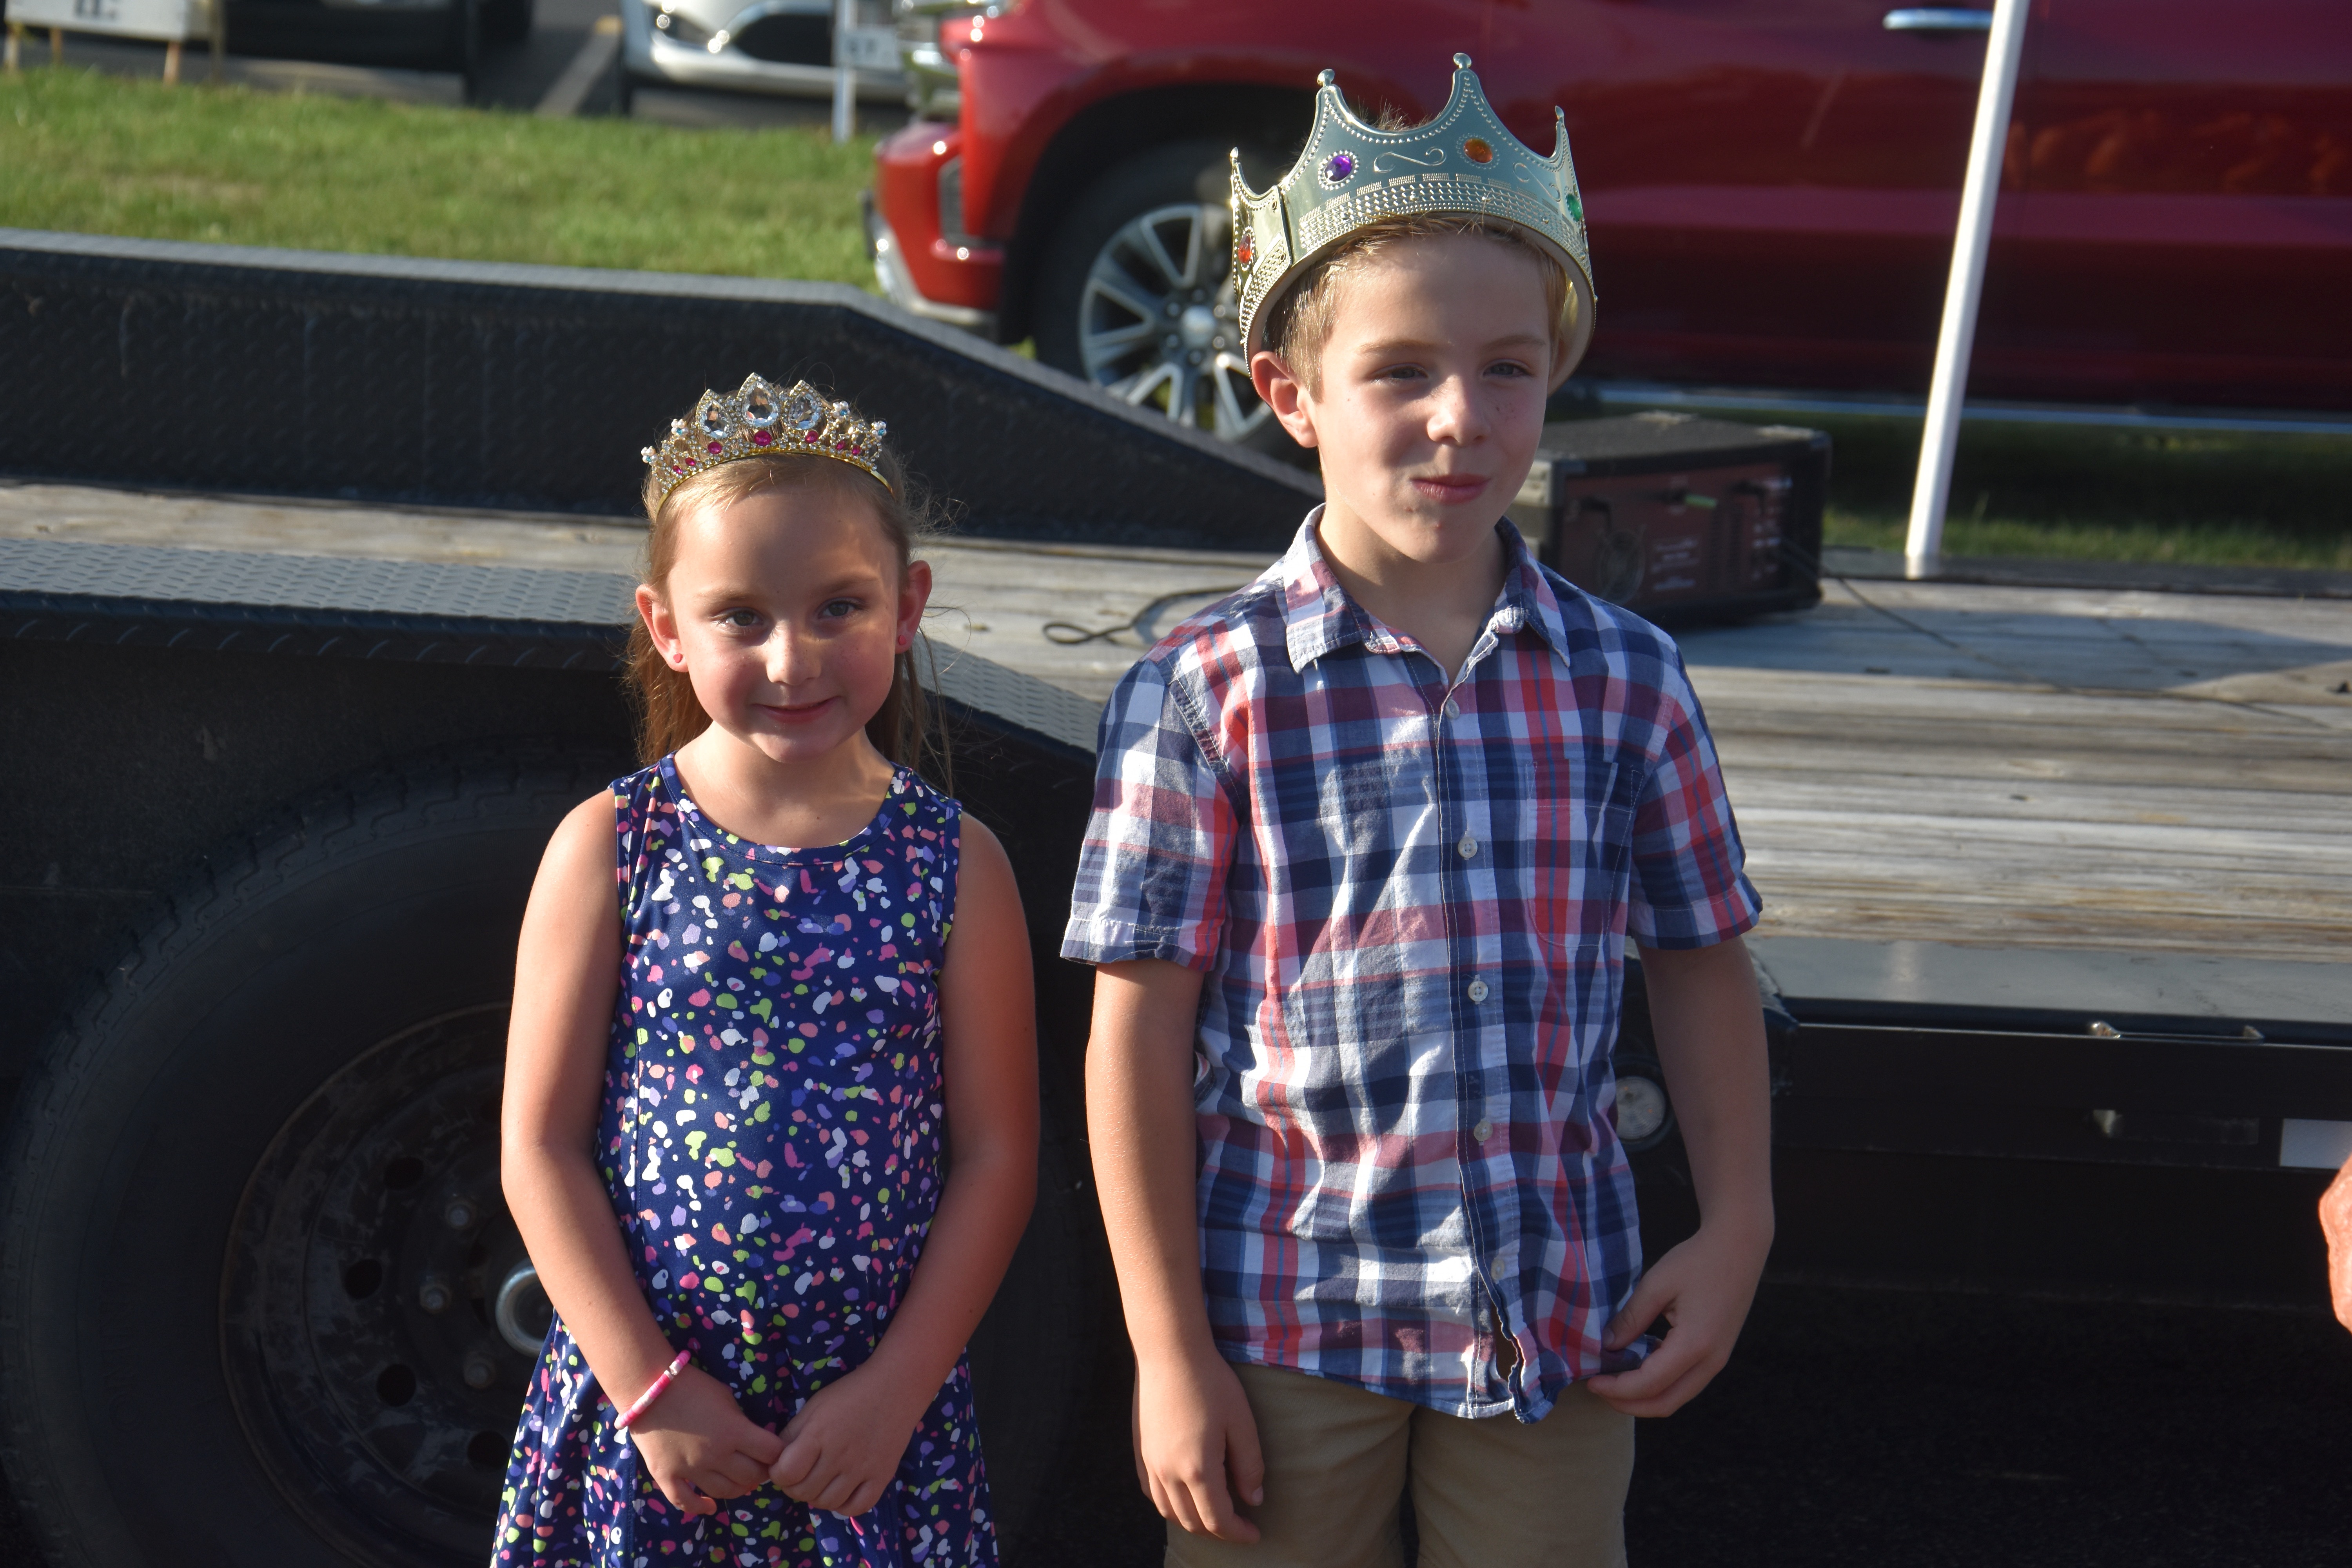 Little Princess and Little Prince with crowns